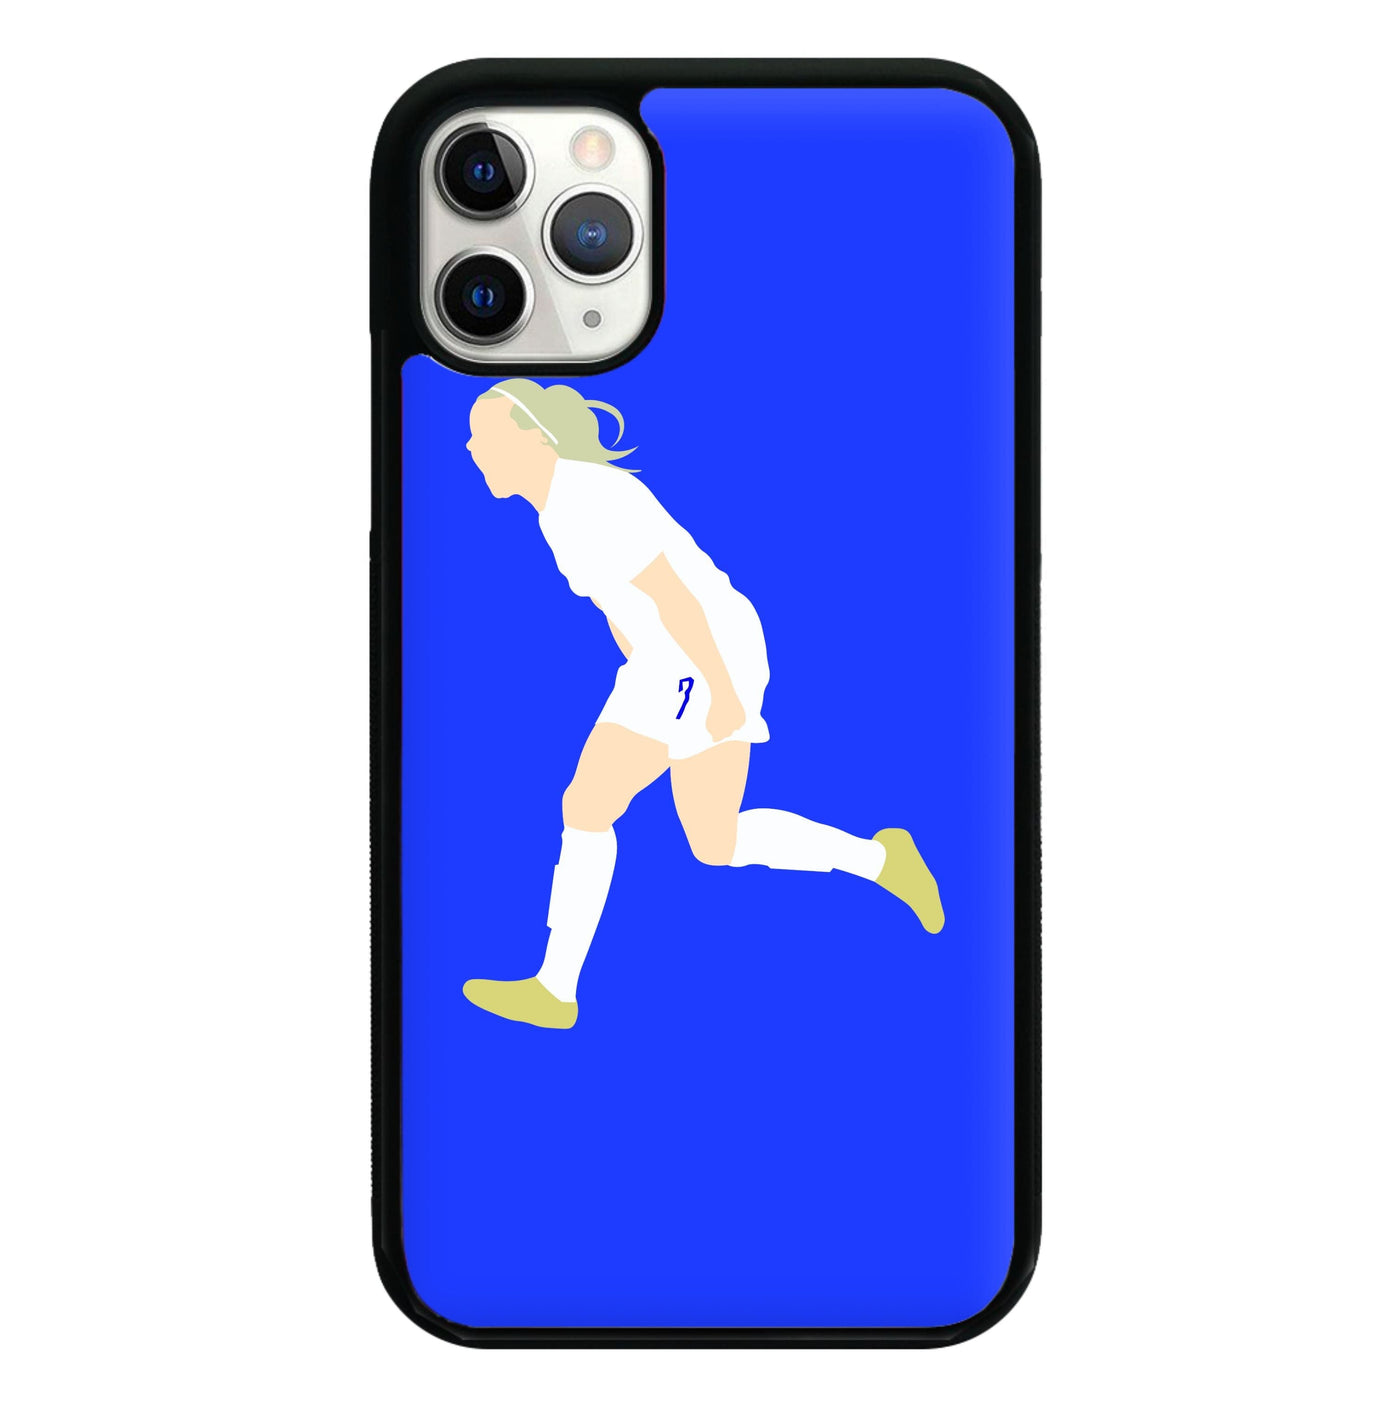 Beth Mead - Womens World Cup Phone Case